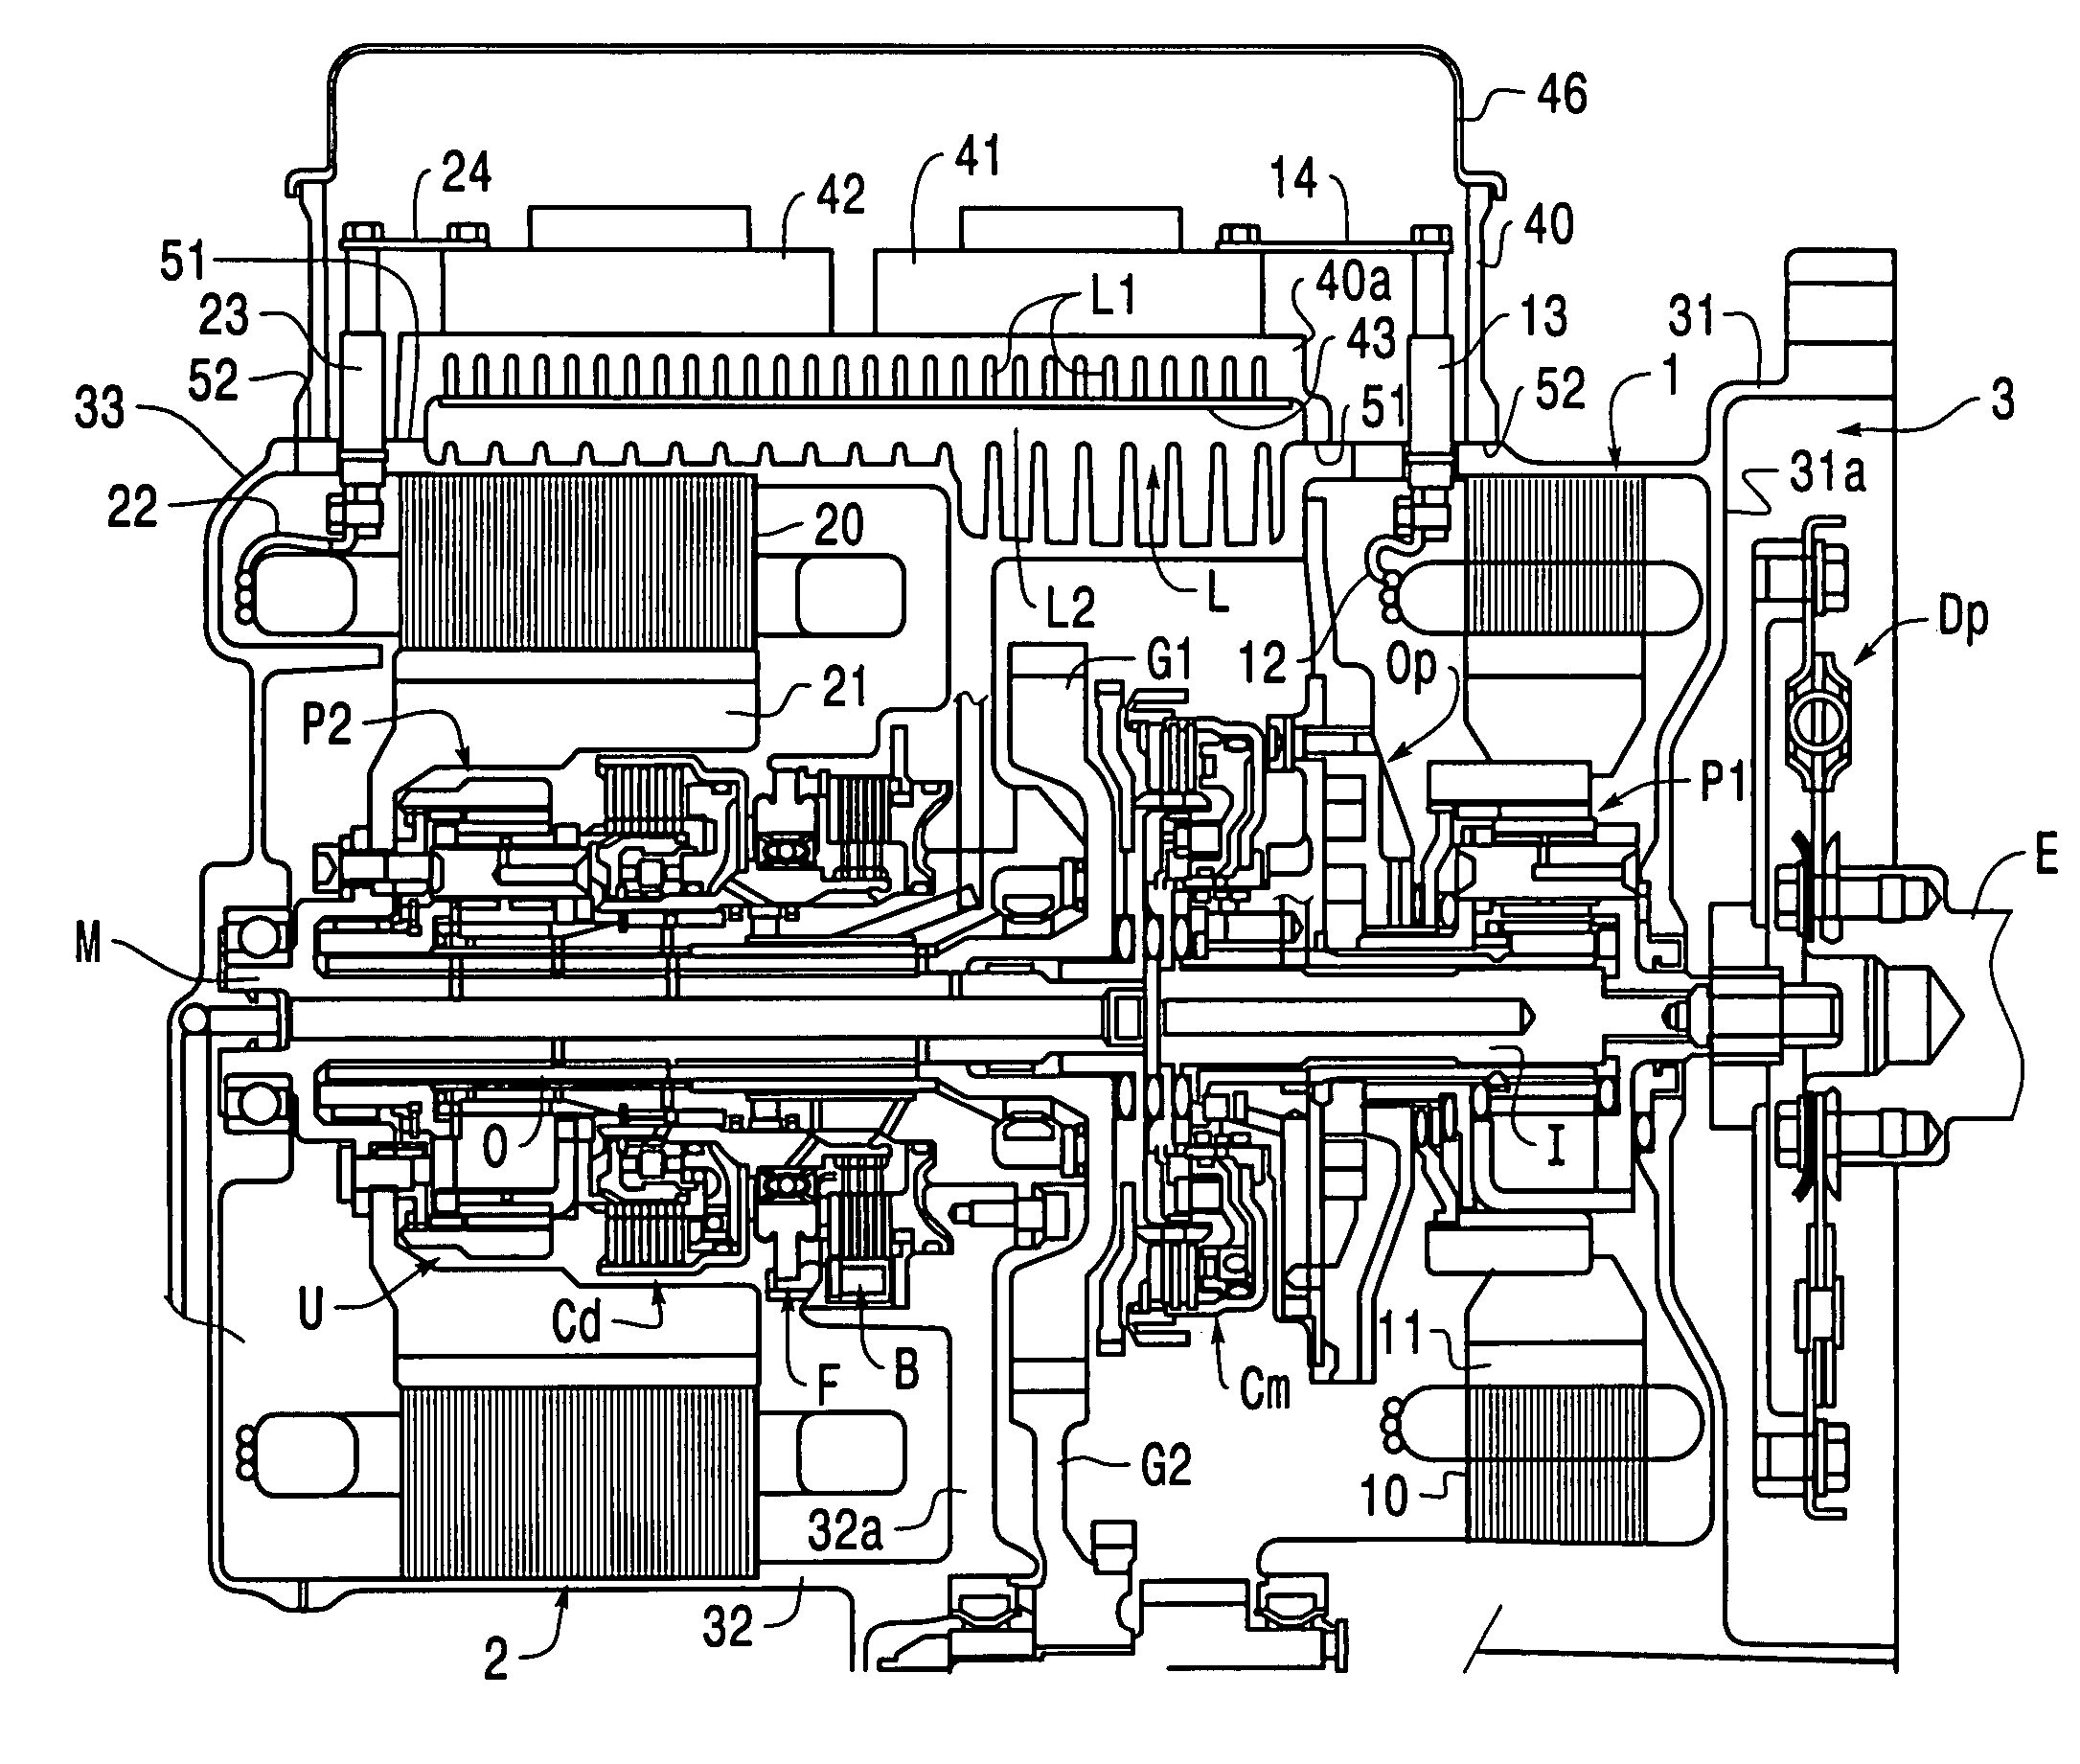 Drive system including electric power devices